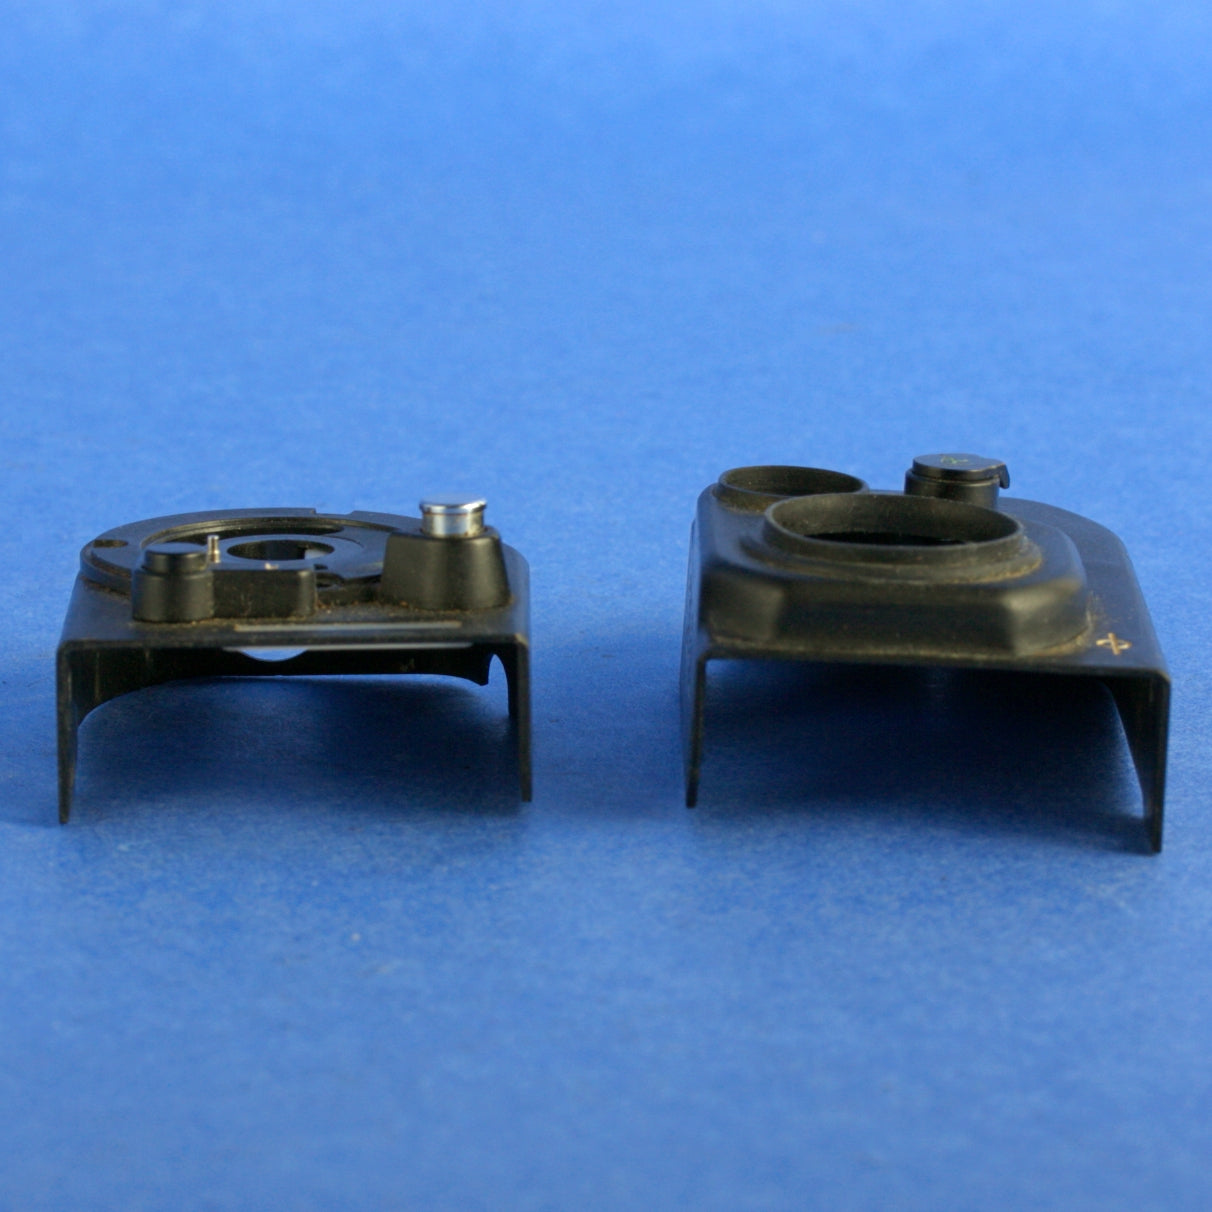 Canon Left and Right Front Plate Parts for F-1N Cameras